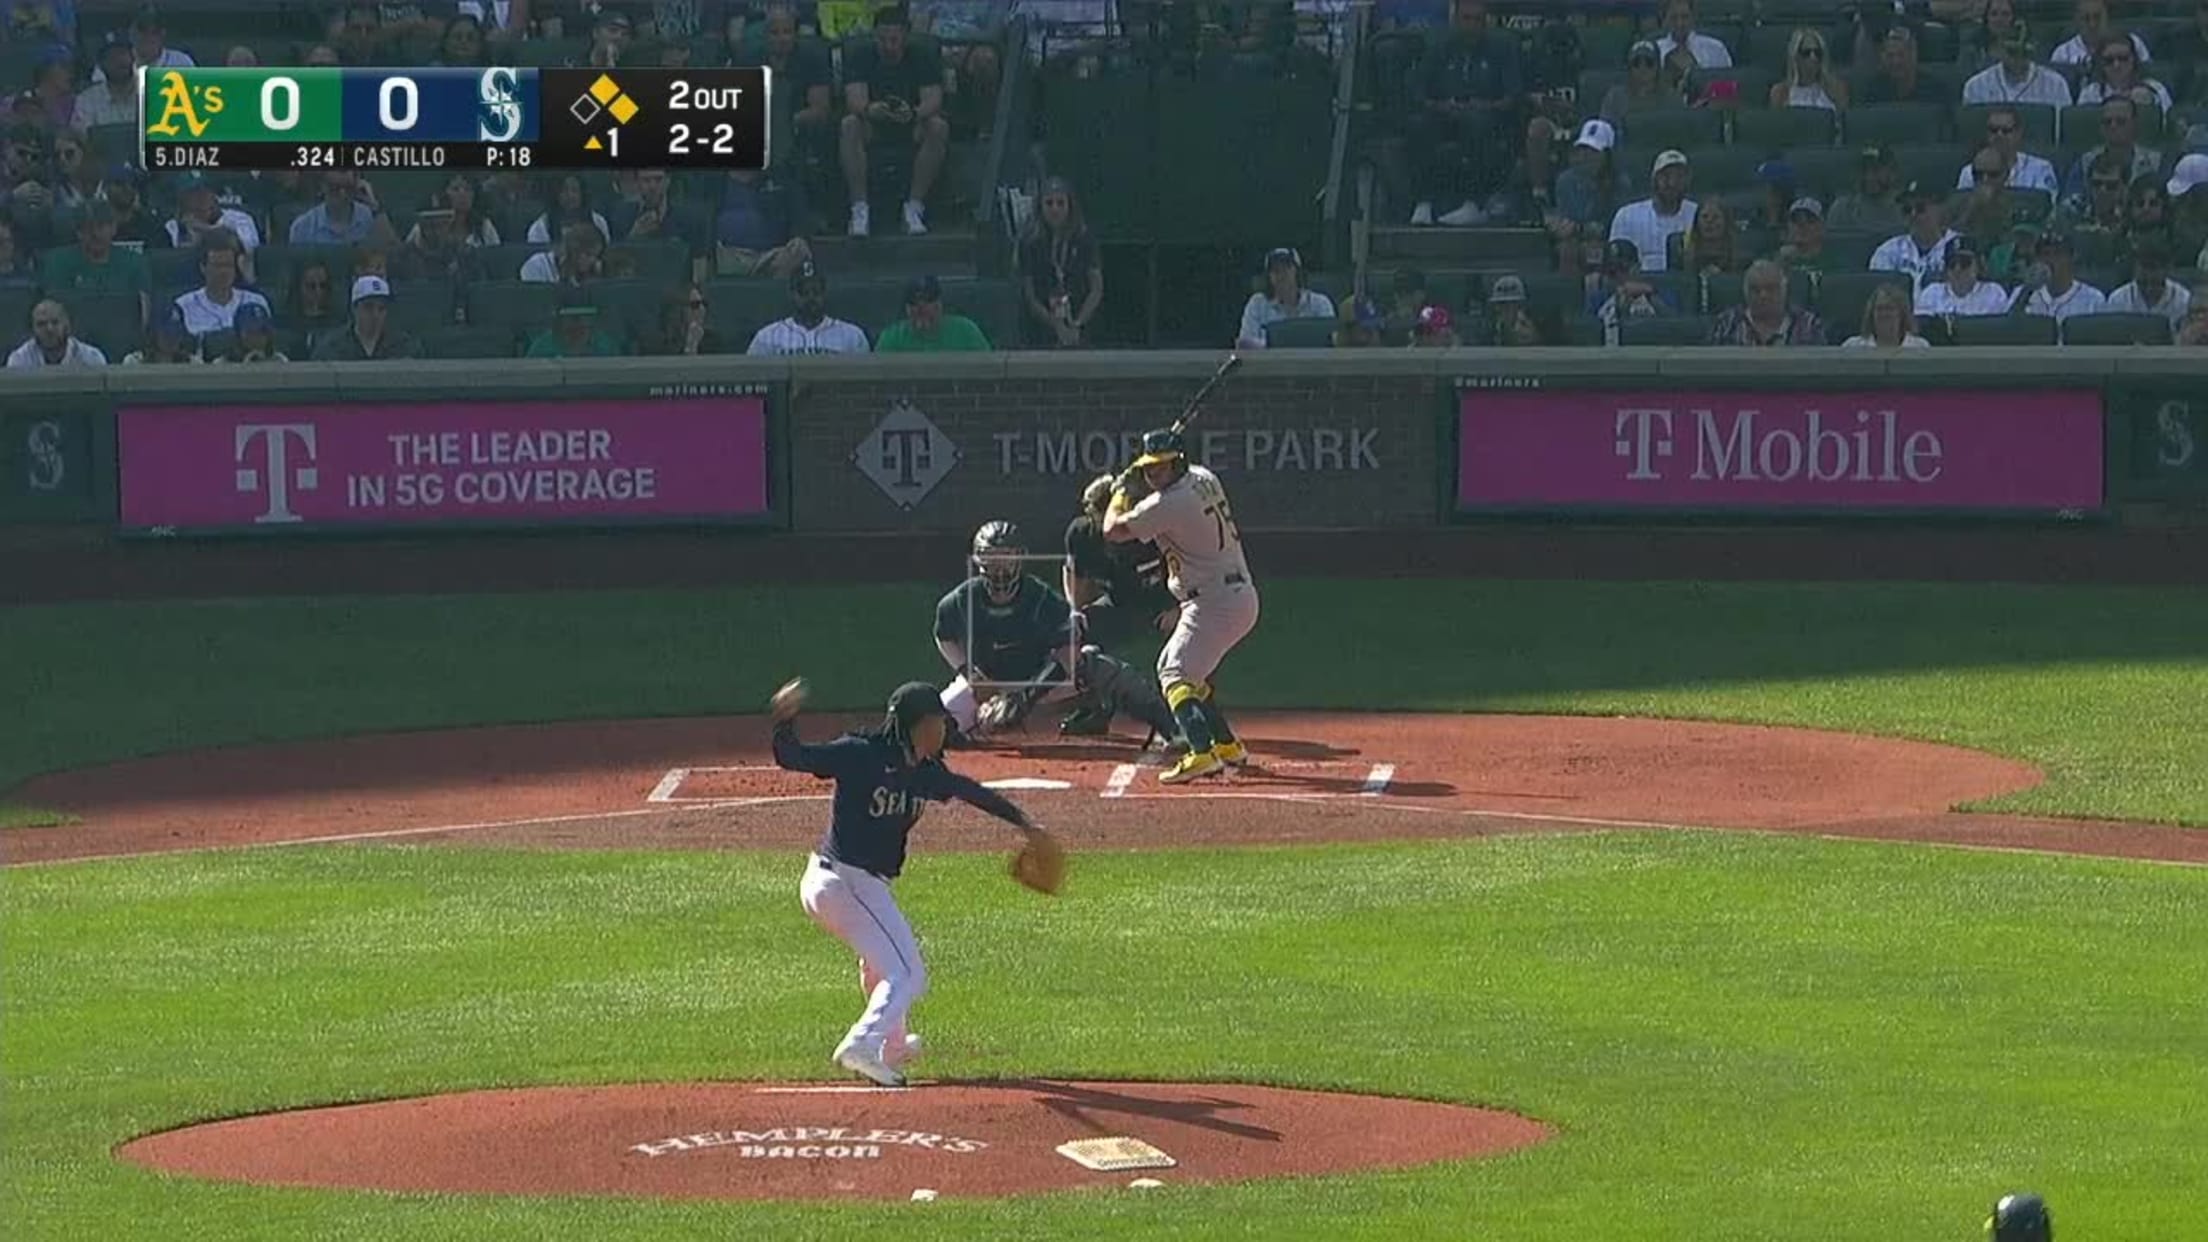 Jordan Diaz's first MLB hit sole highlight in A's loss to Astros